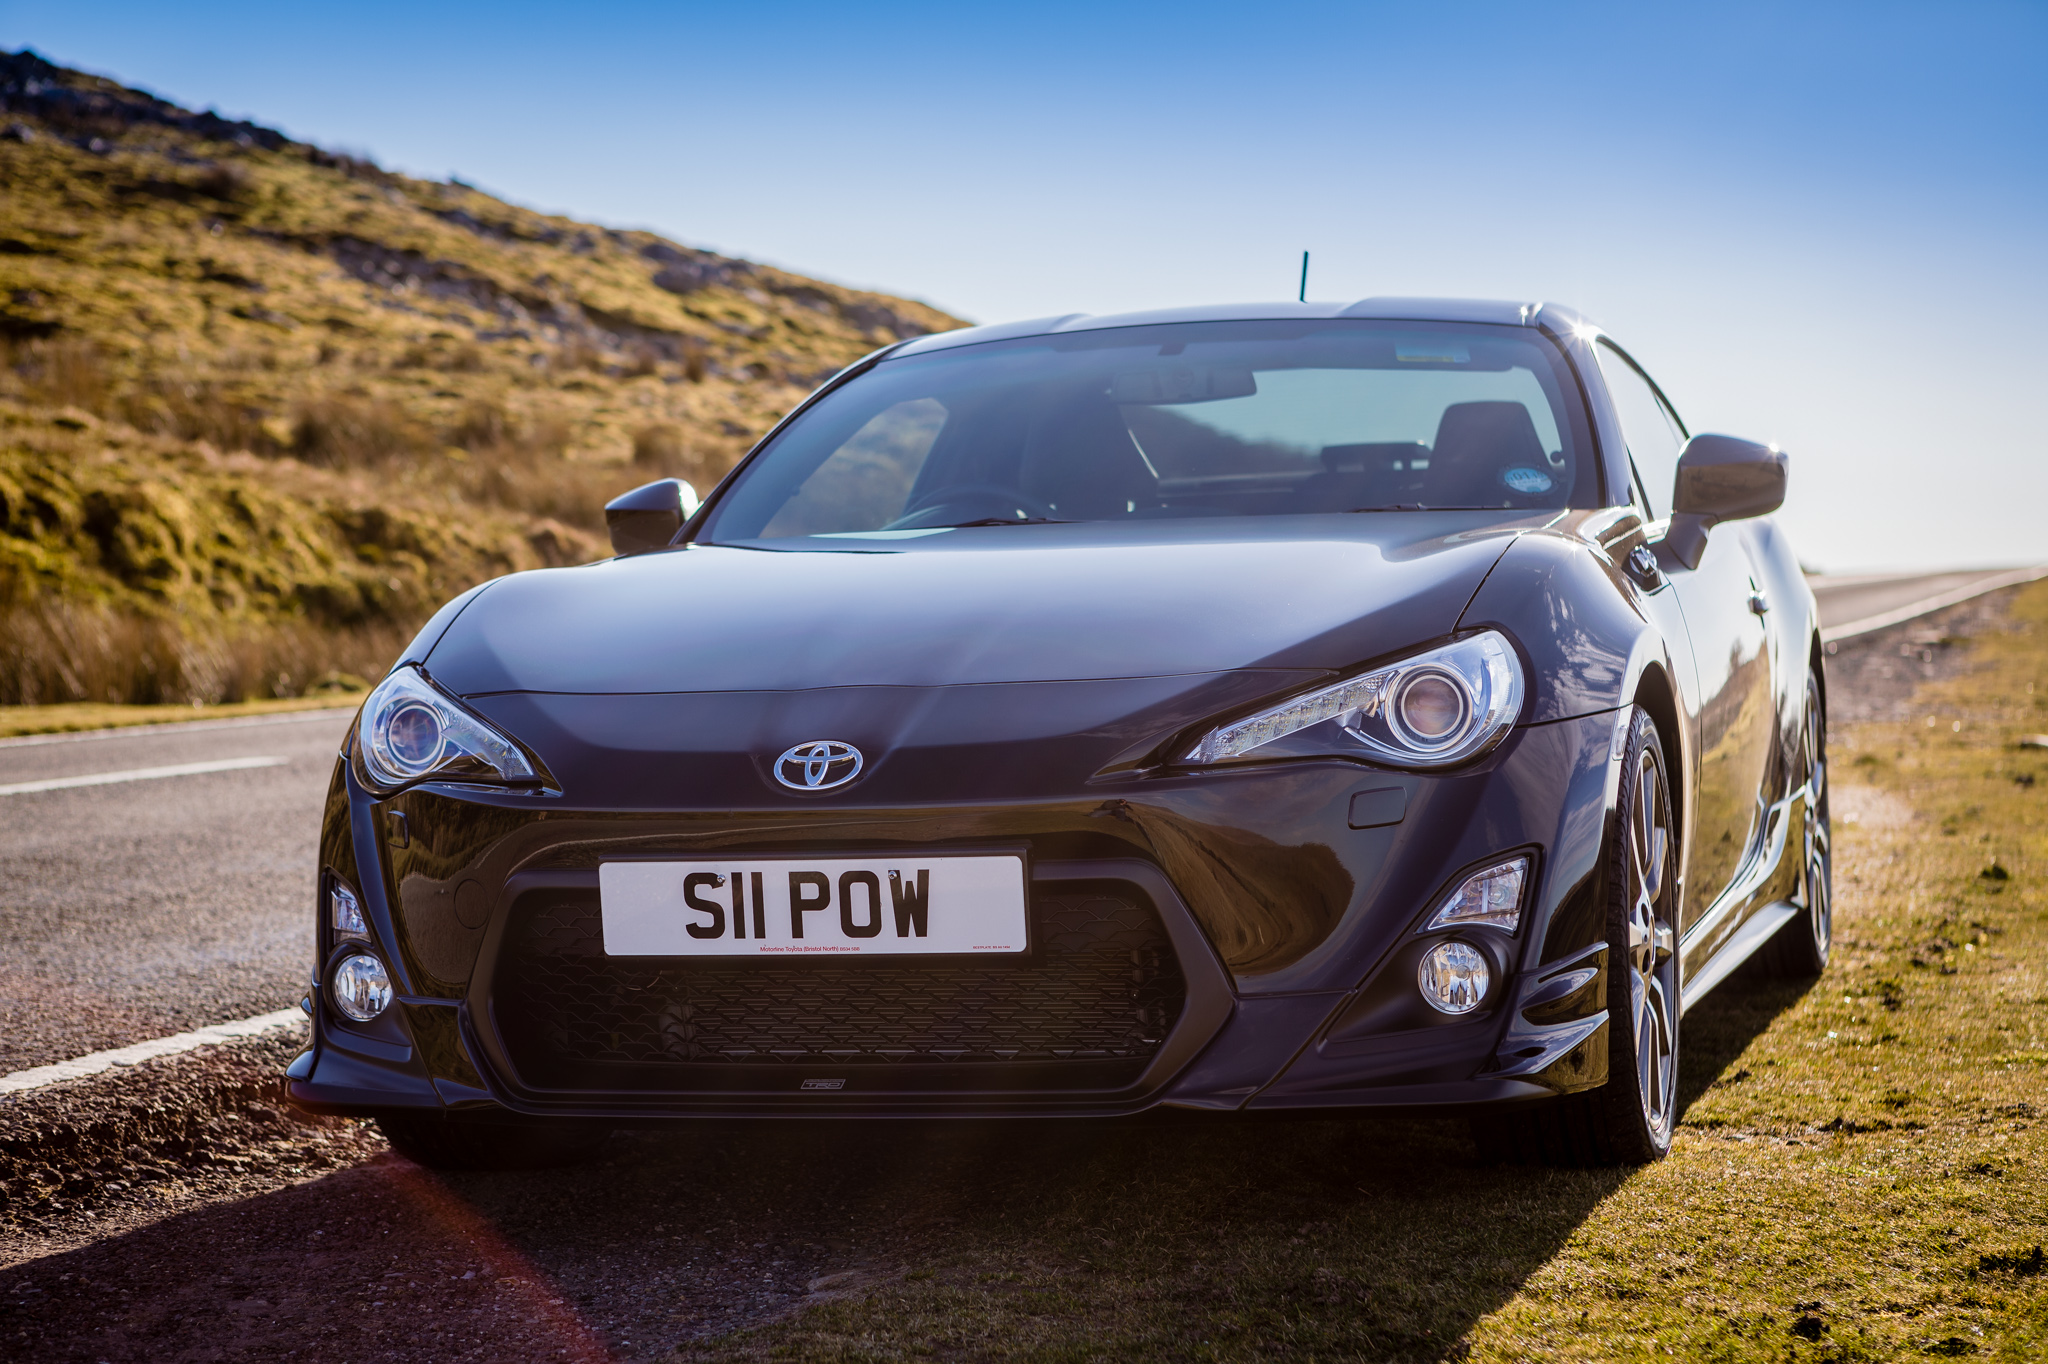 Final image of the GT86